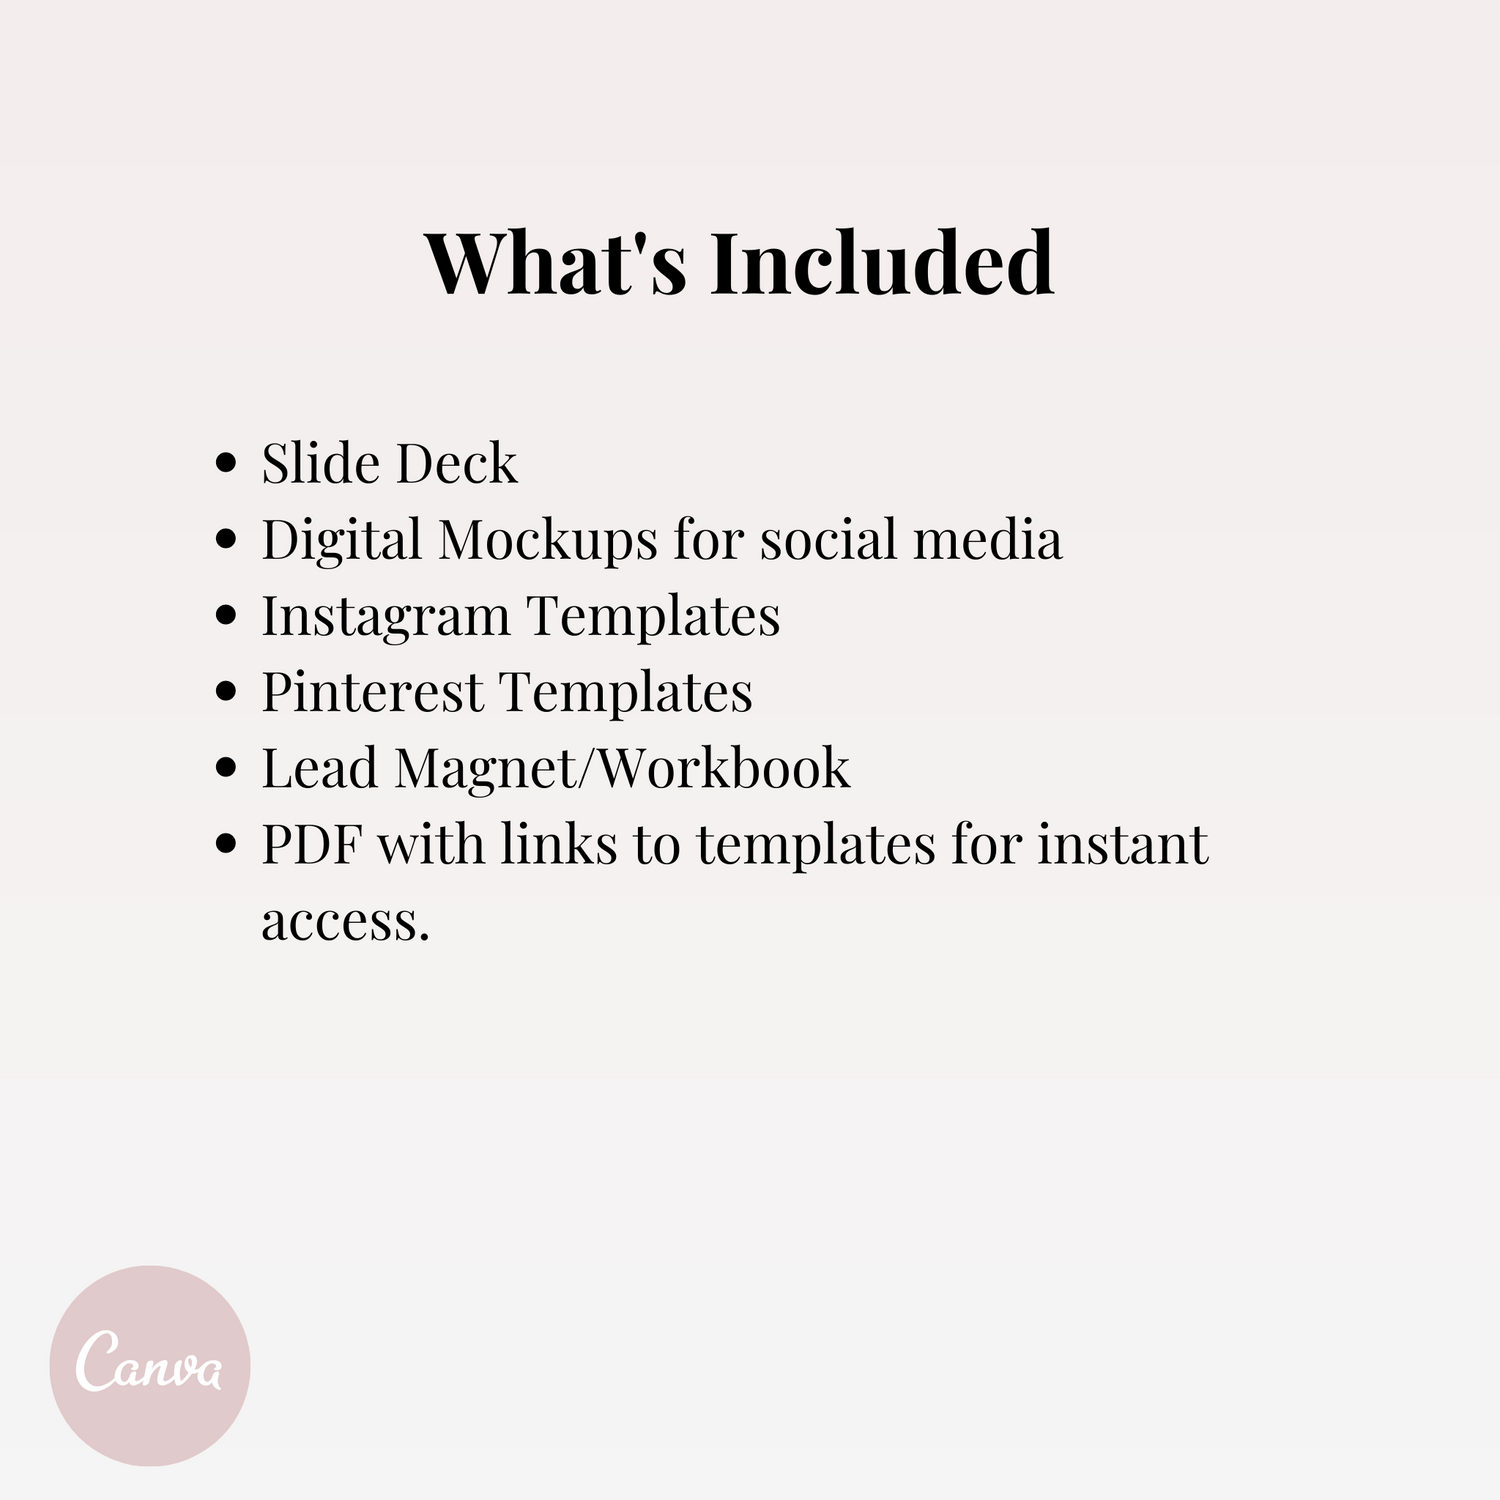 The Neutral Canva Course Creator Bundle includes slide deck templates, digital mockups for social media, instagram templates, pinterest templates, lead magnet and workbook templates, and PDF with links to instant access for your done-for-you template bundle. Quickly and affordably plan, build, and launch your next course with easily customizable templates in a dreamy, neutral aesthetic that captures your audience’s attention and converts clicks into clients. 